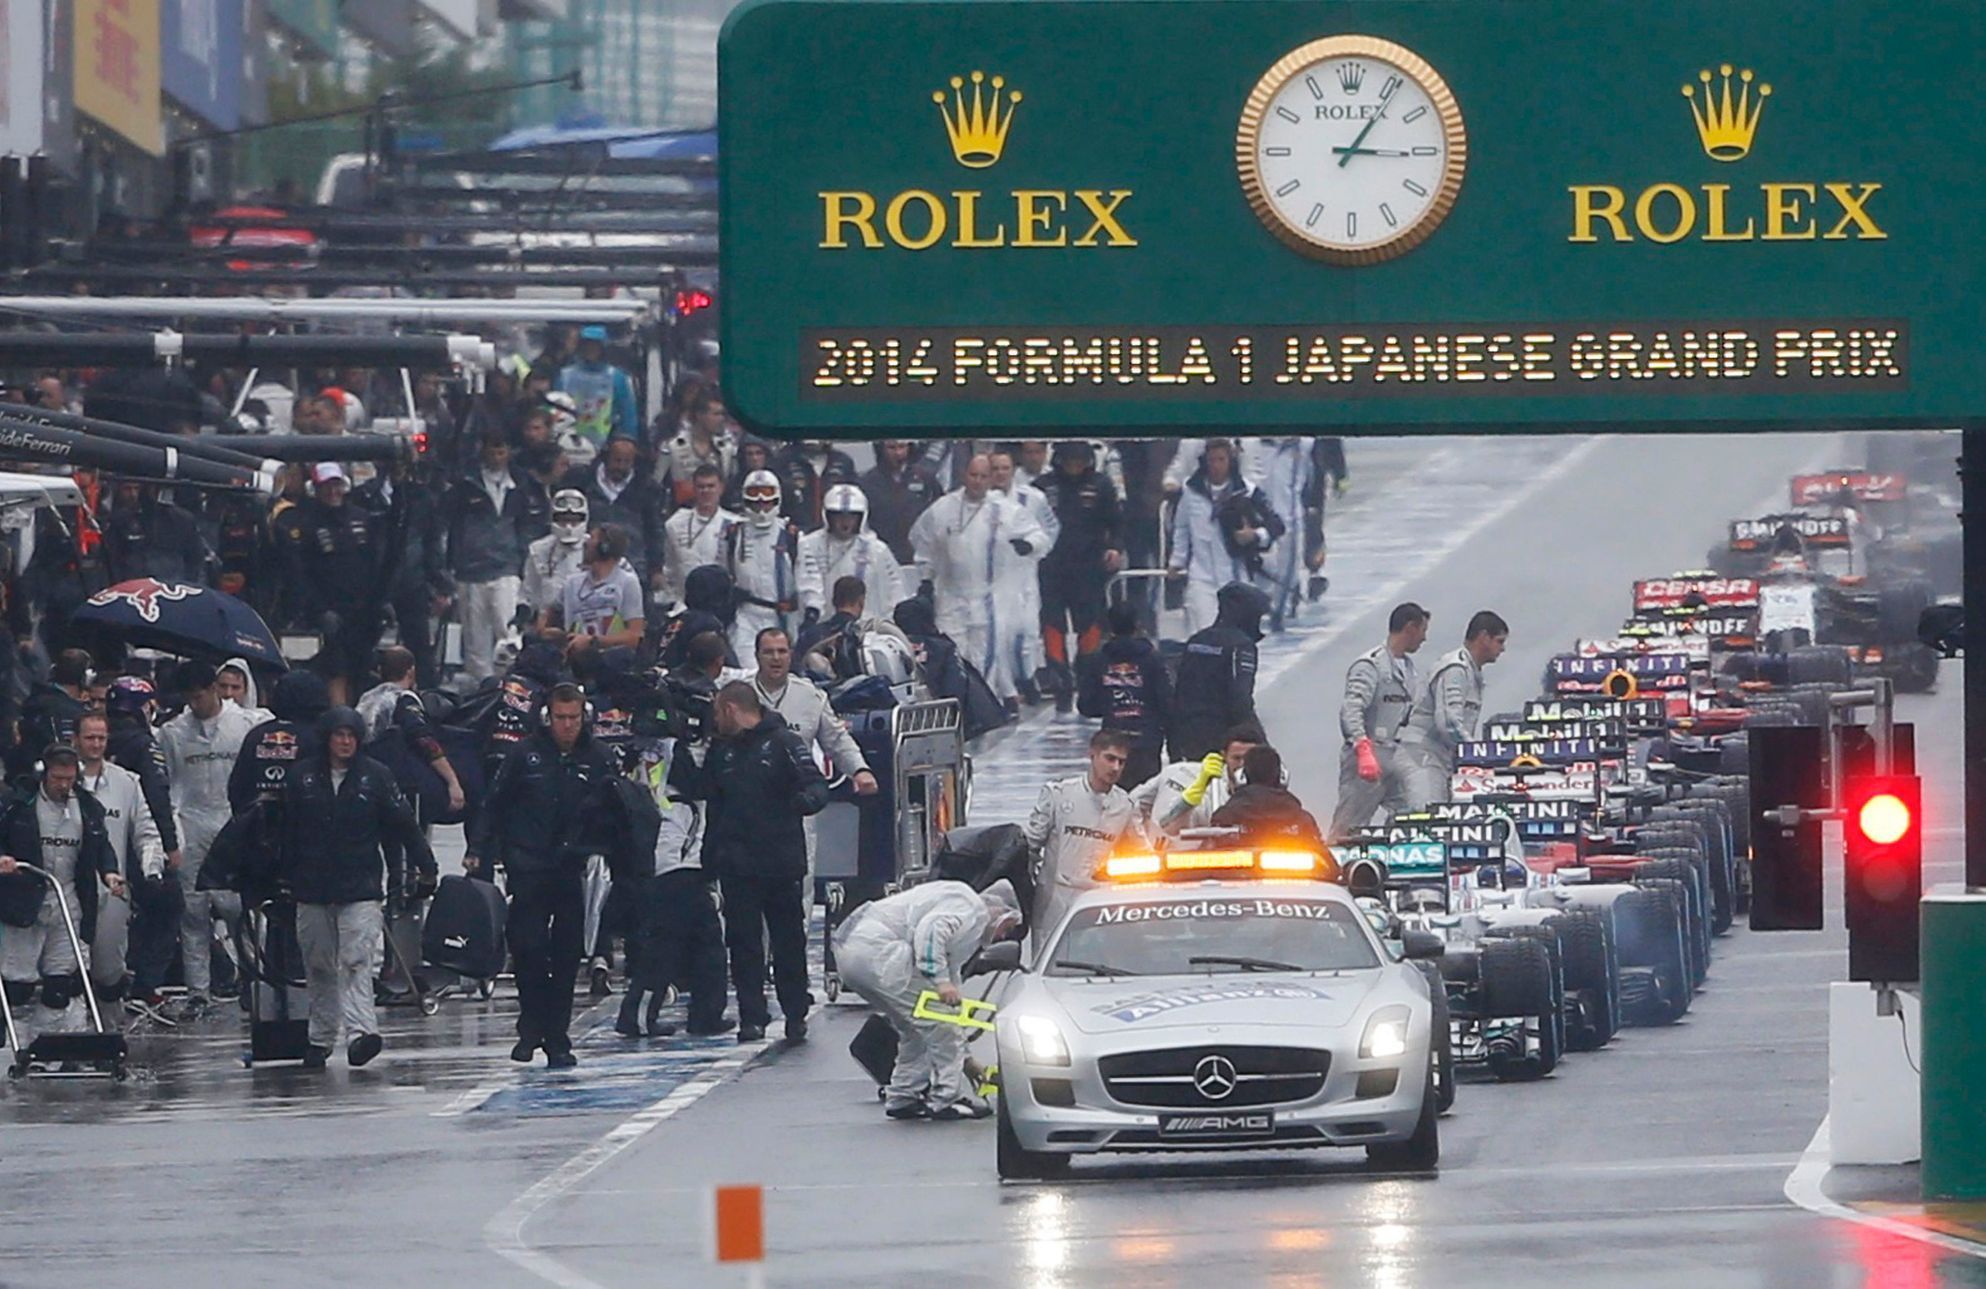 Cars line up behind the safety car in the pit lane as the race is suspended due to rain conditions during the Japanese F1 Grand Prix at the Suzuka Circuit